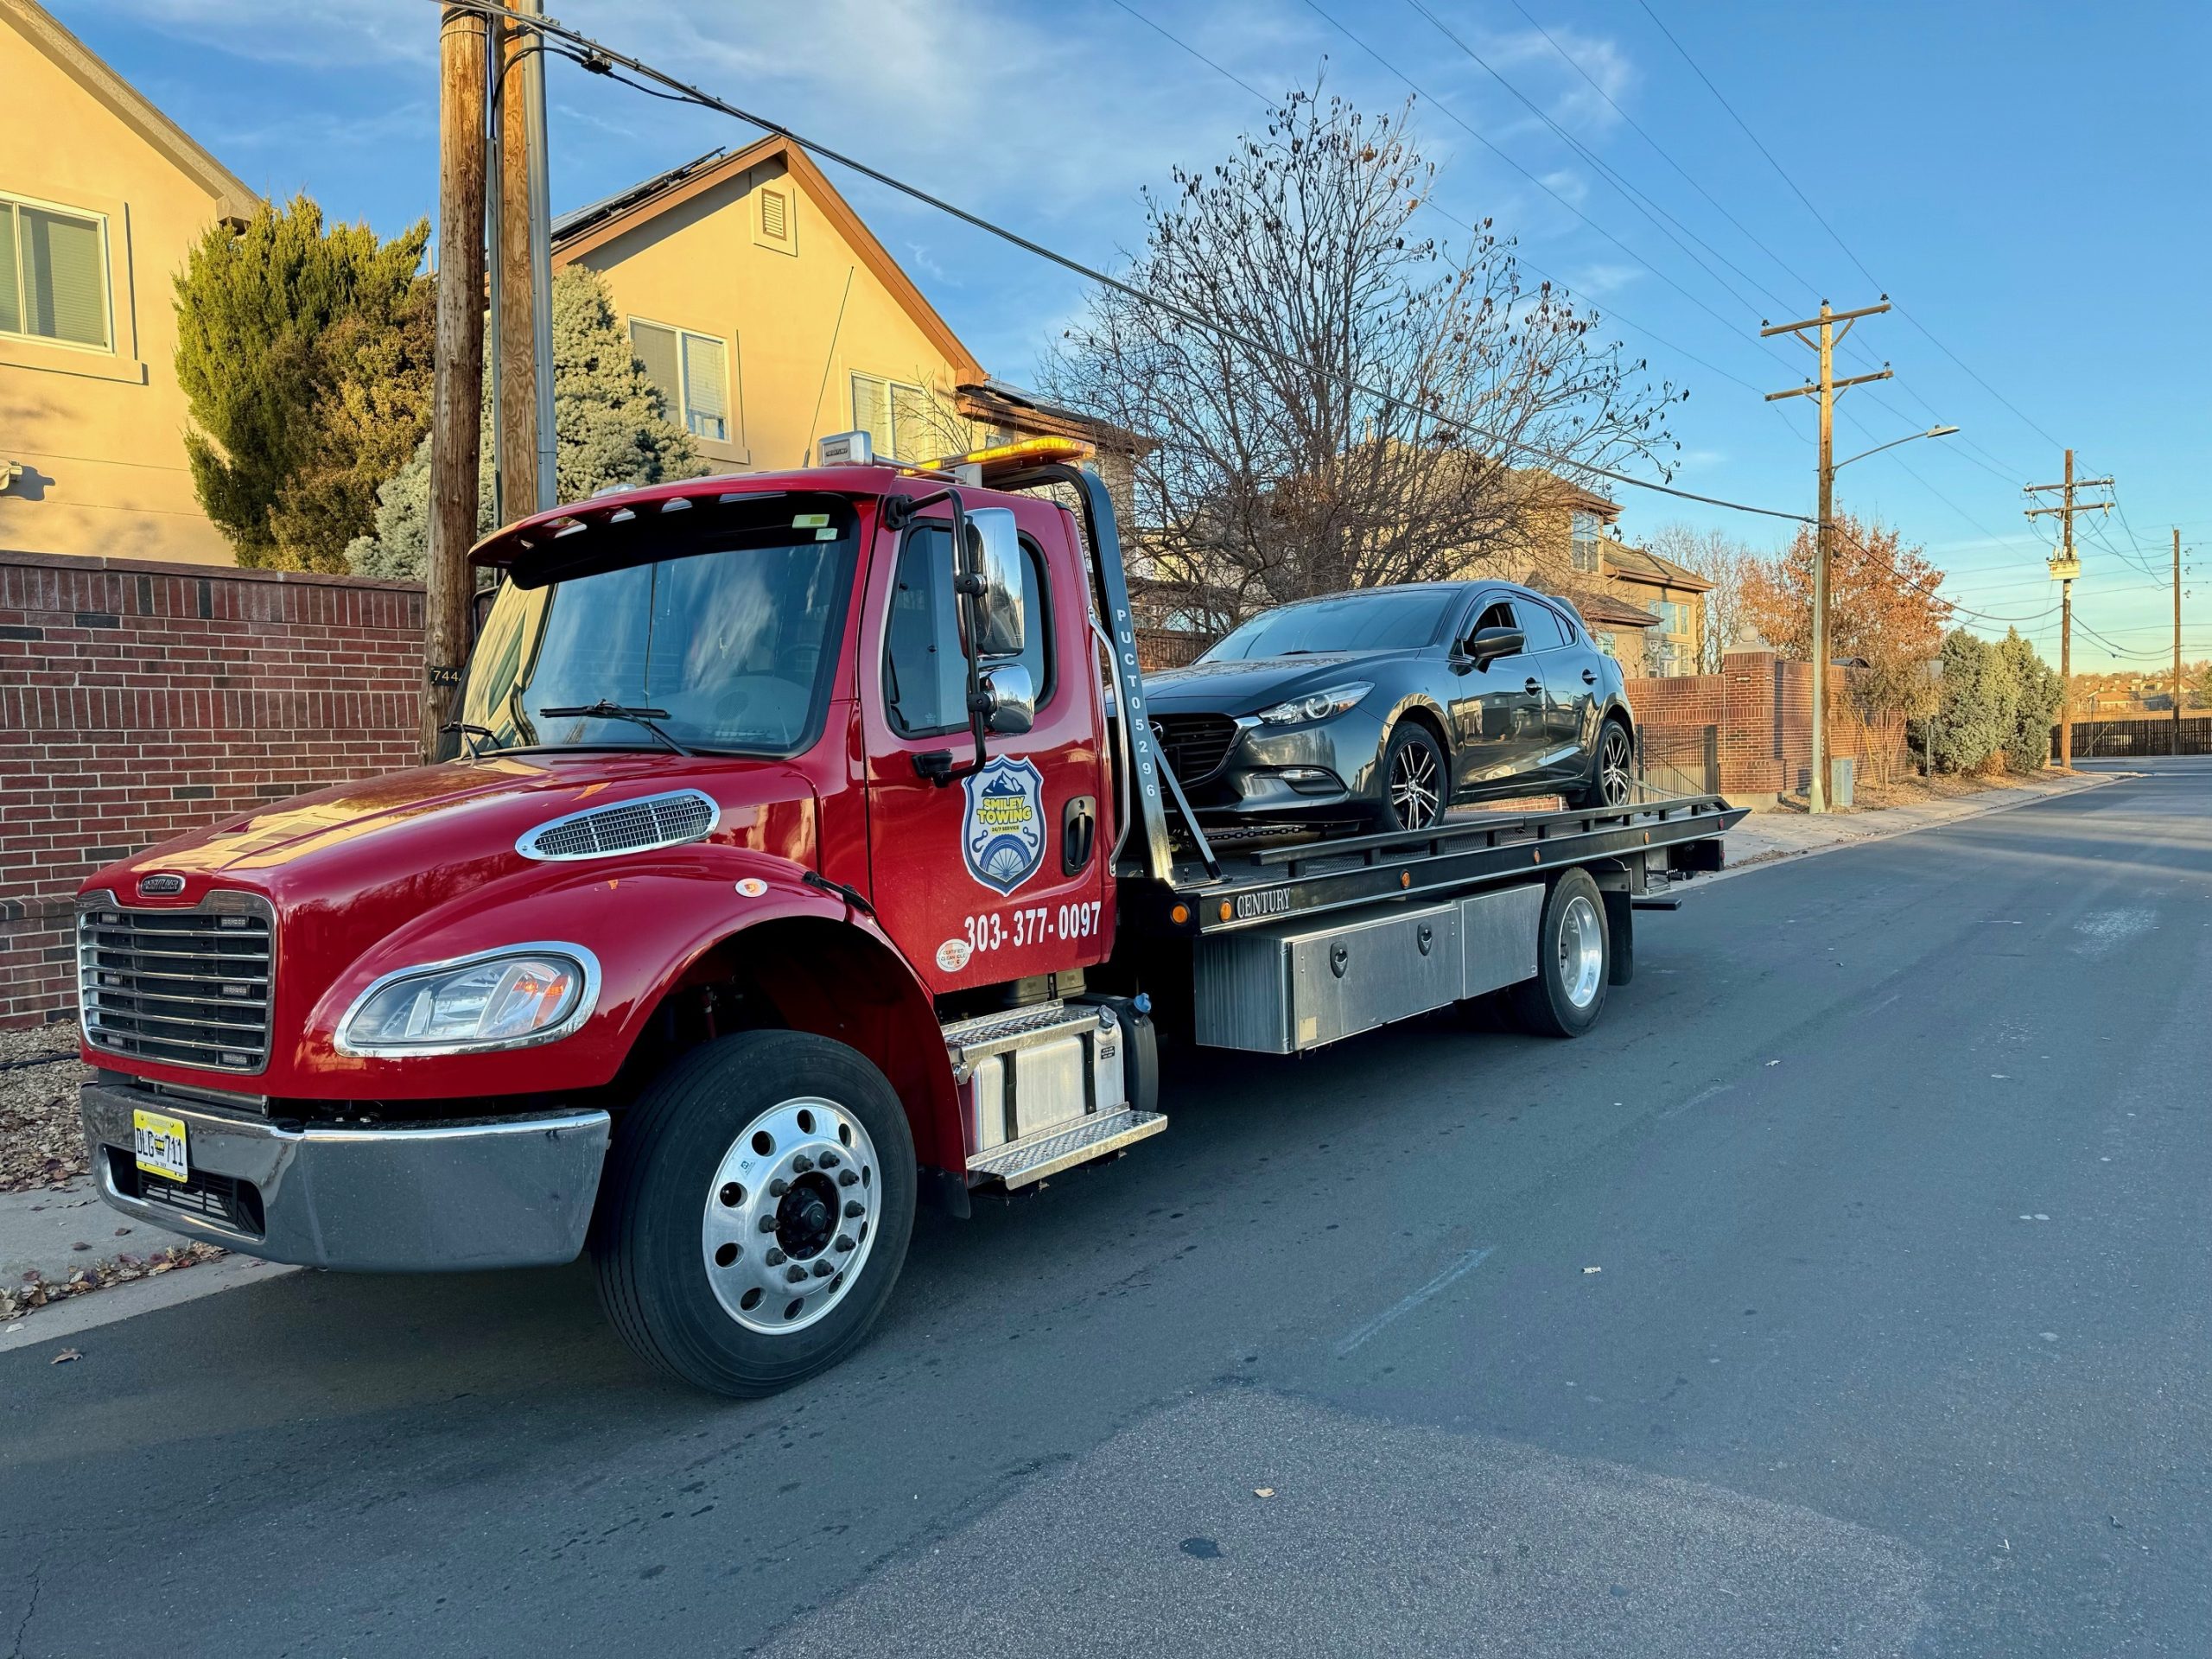 this image shows long-distance towing services in Aurora, CO